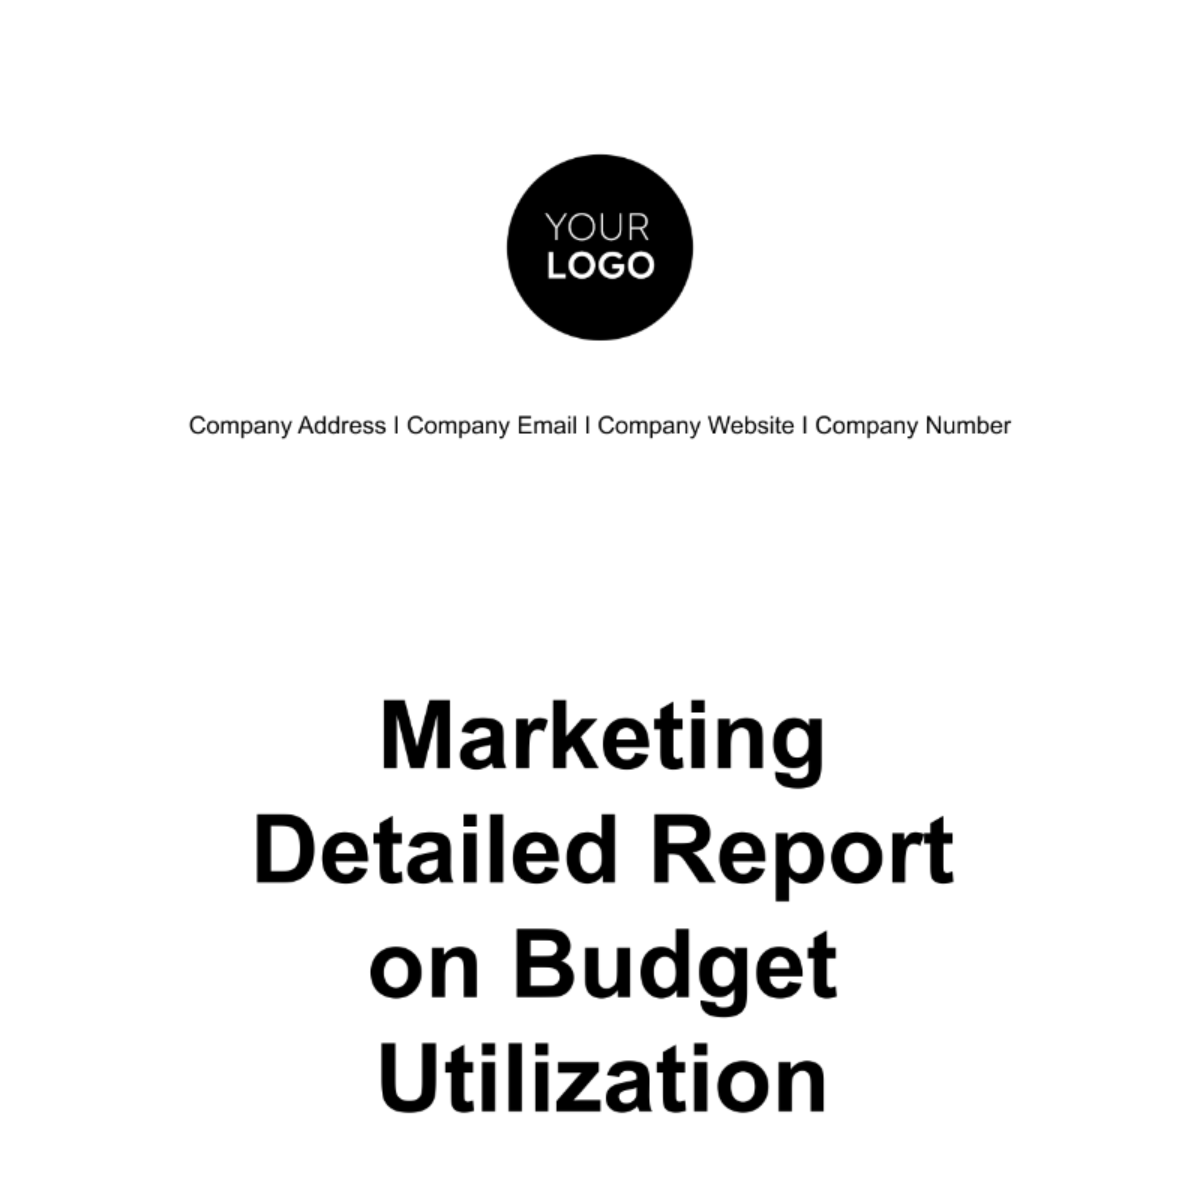 Marketing Detailed Report on Budget Utilization Template